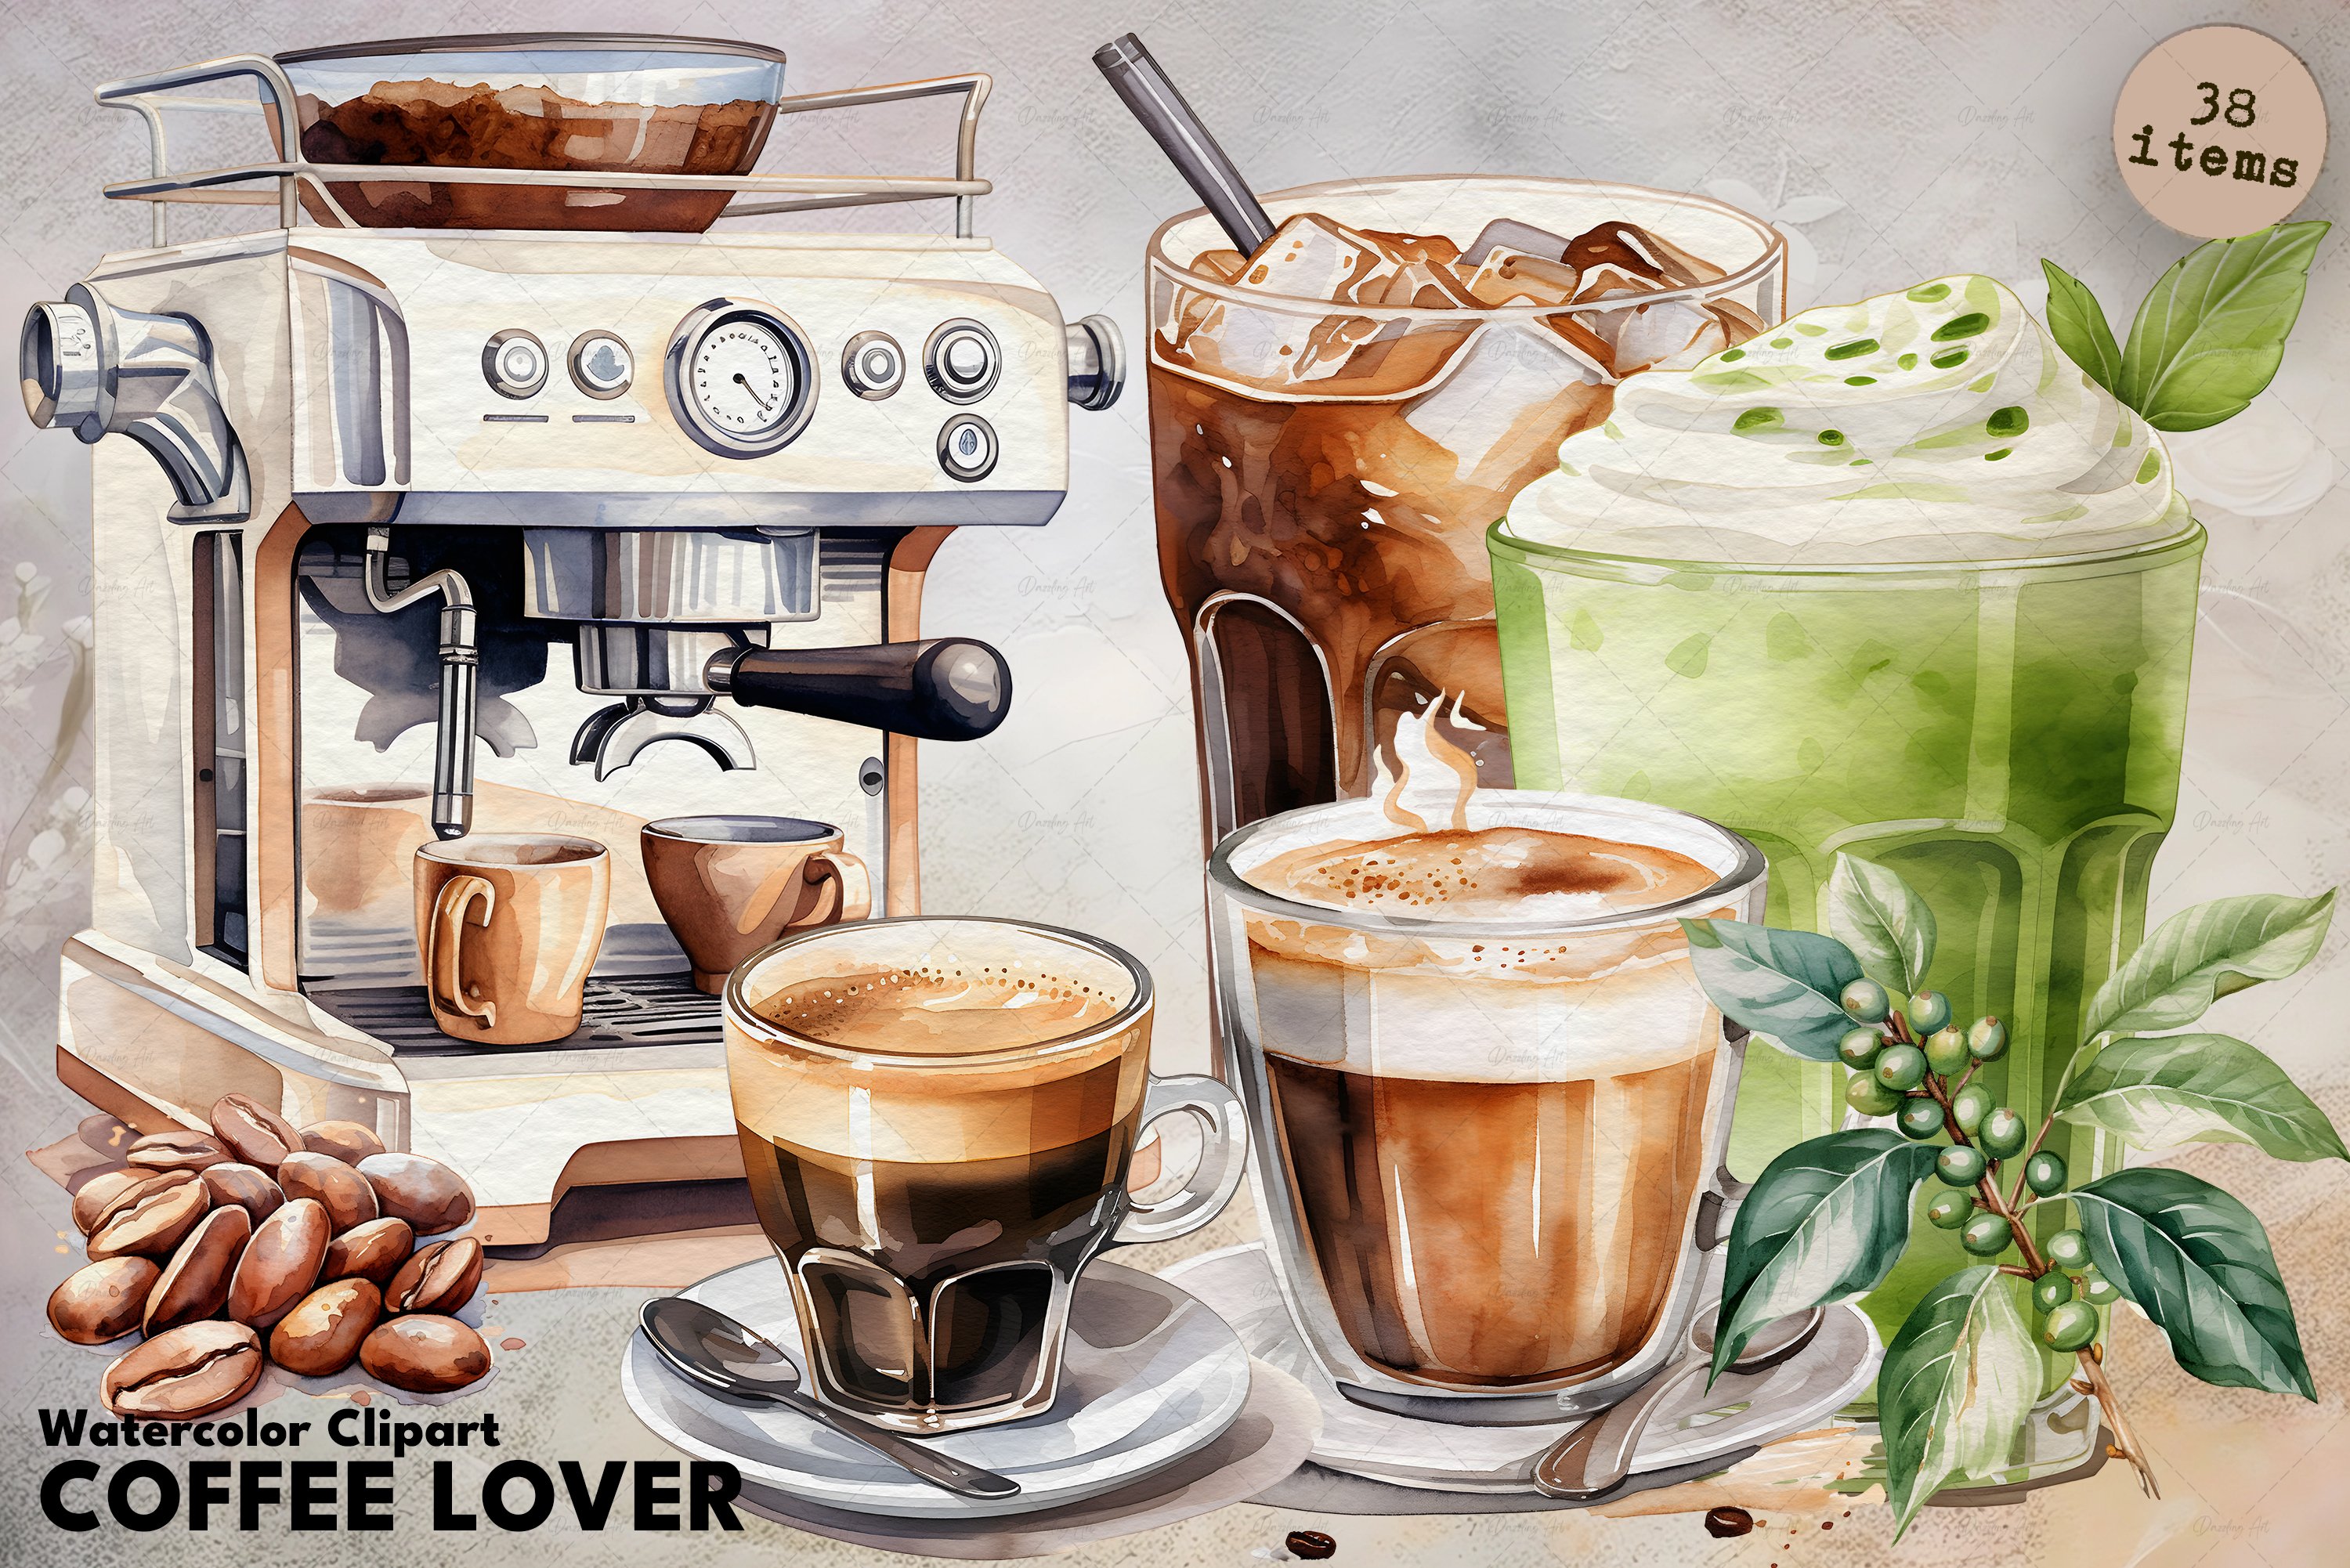 Coffee Lovers Cafe